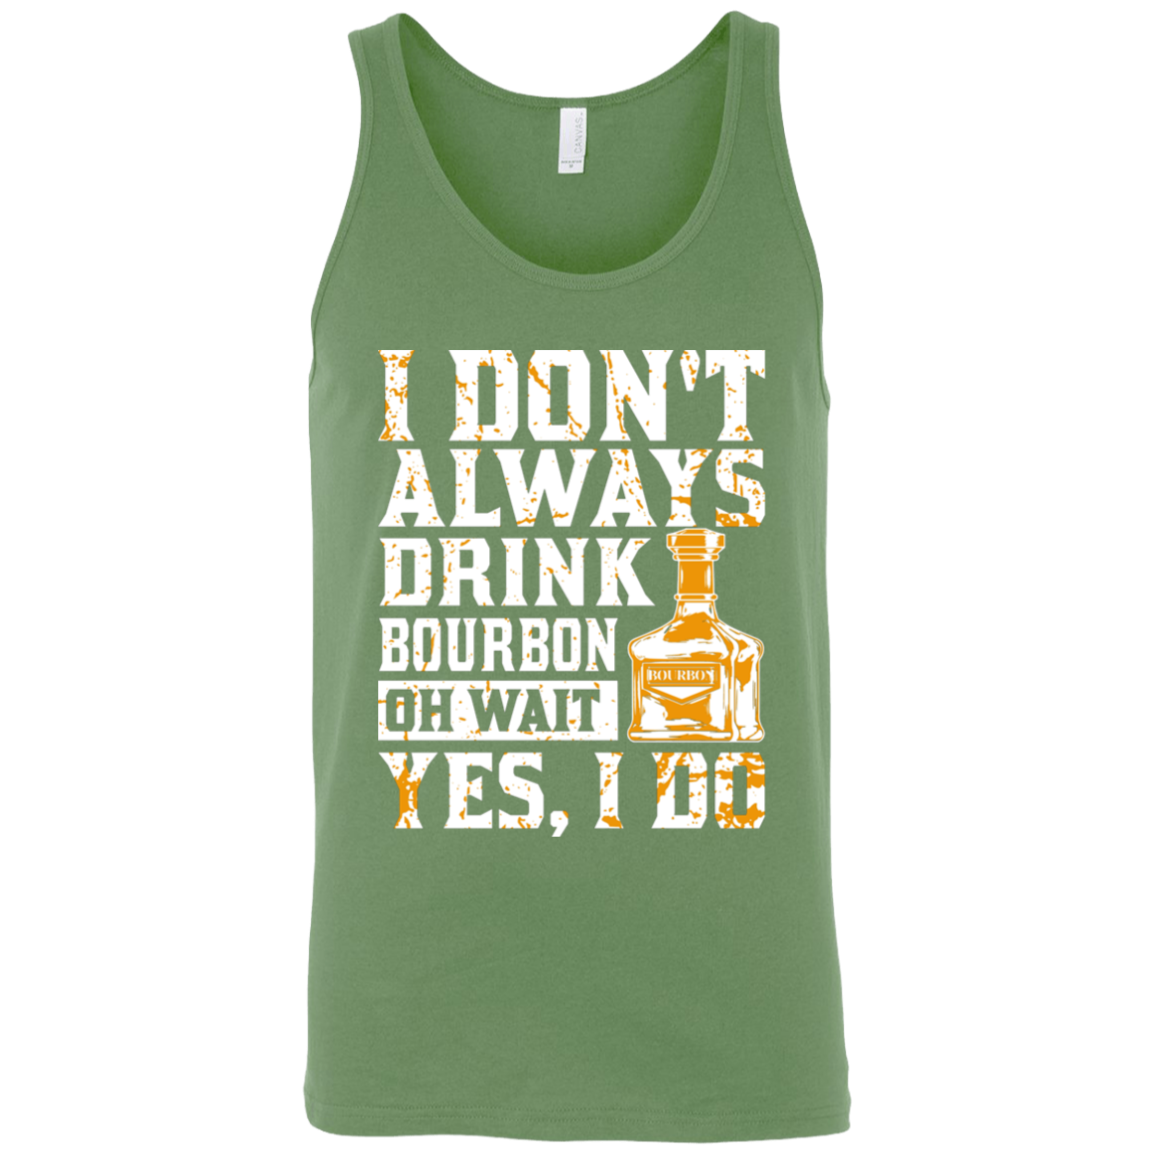 I Don't Always Drink Bourbon Oh Wait Yes, I Do Tank Top Apparel - The Beer Lodge